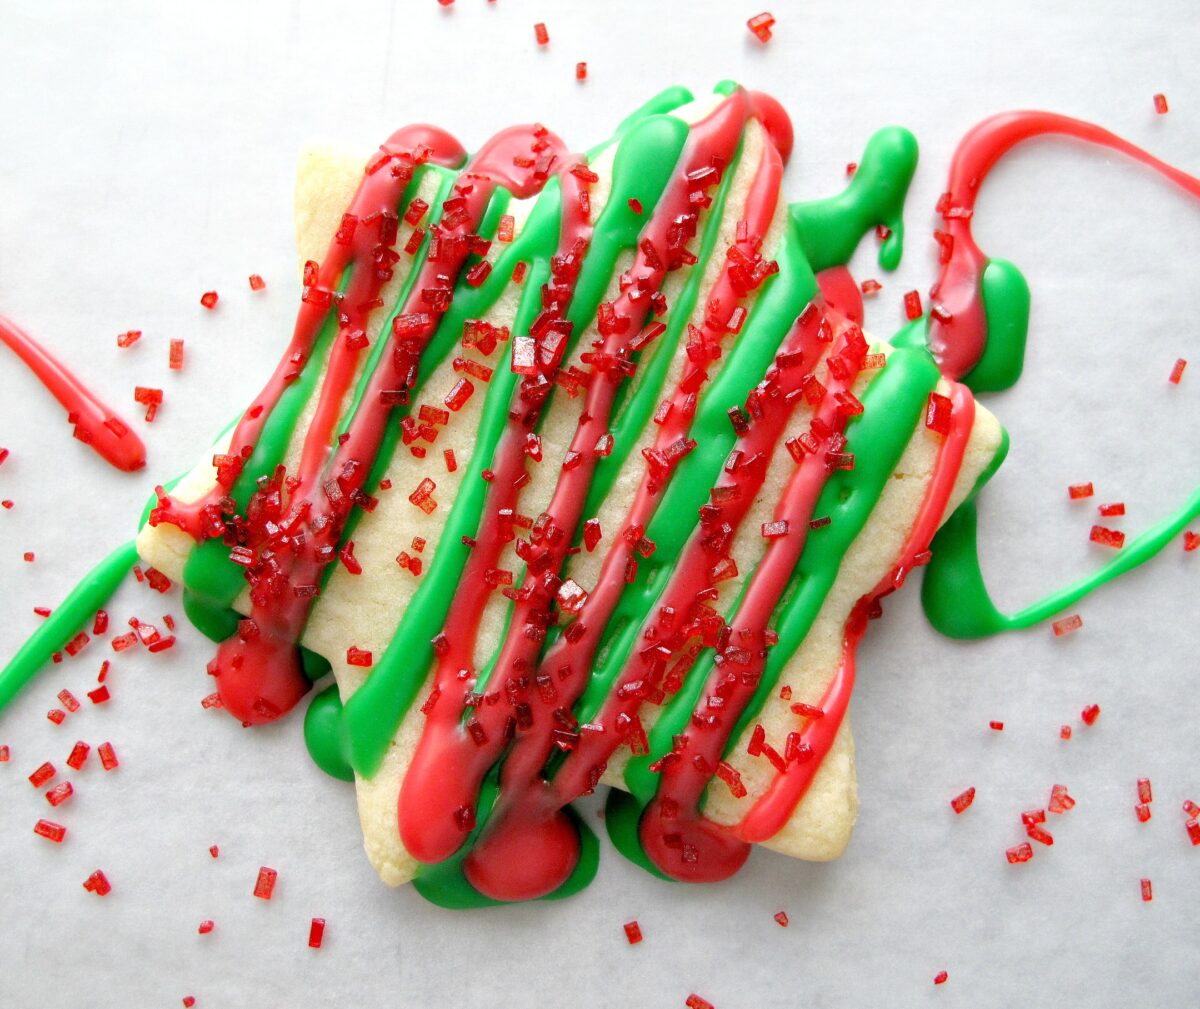 Closeup of red and green icing on a cookie.